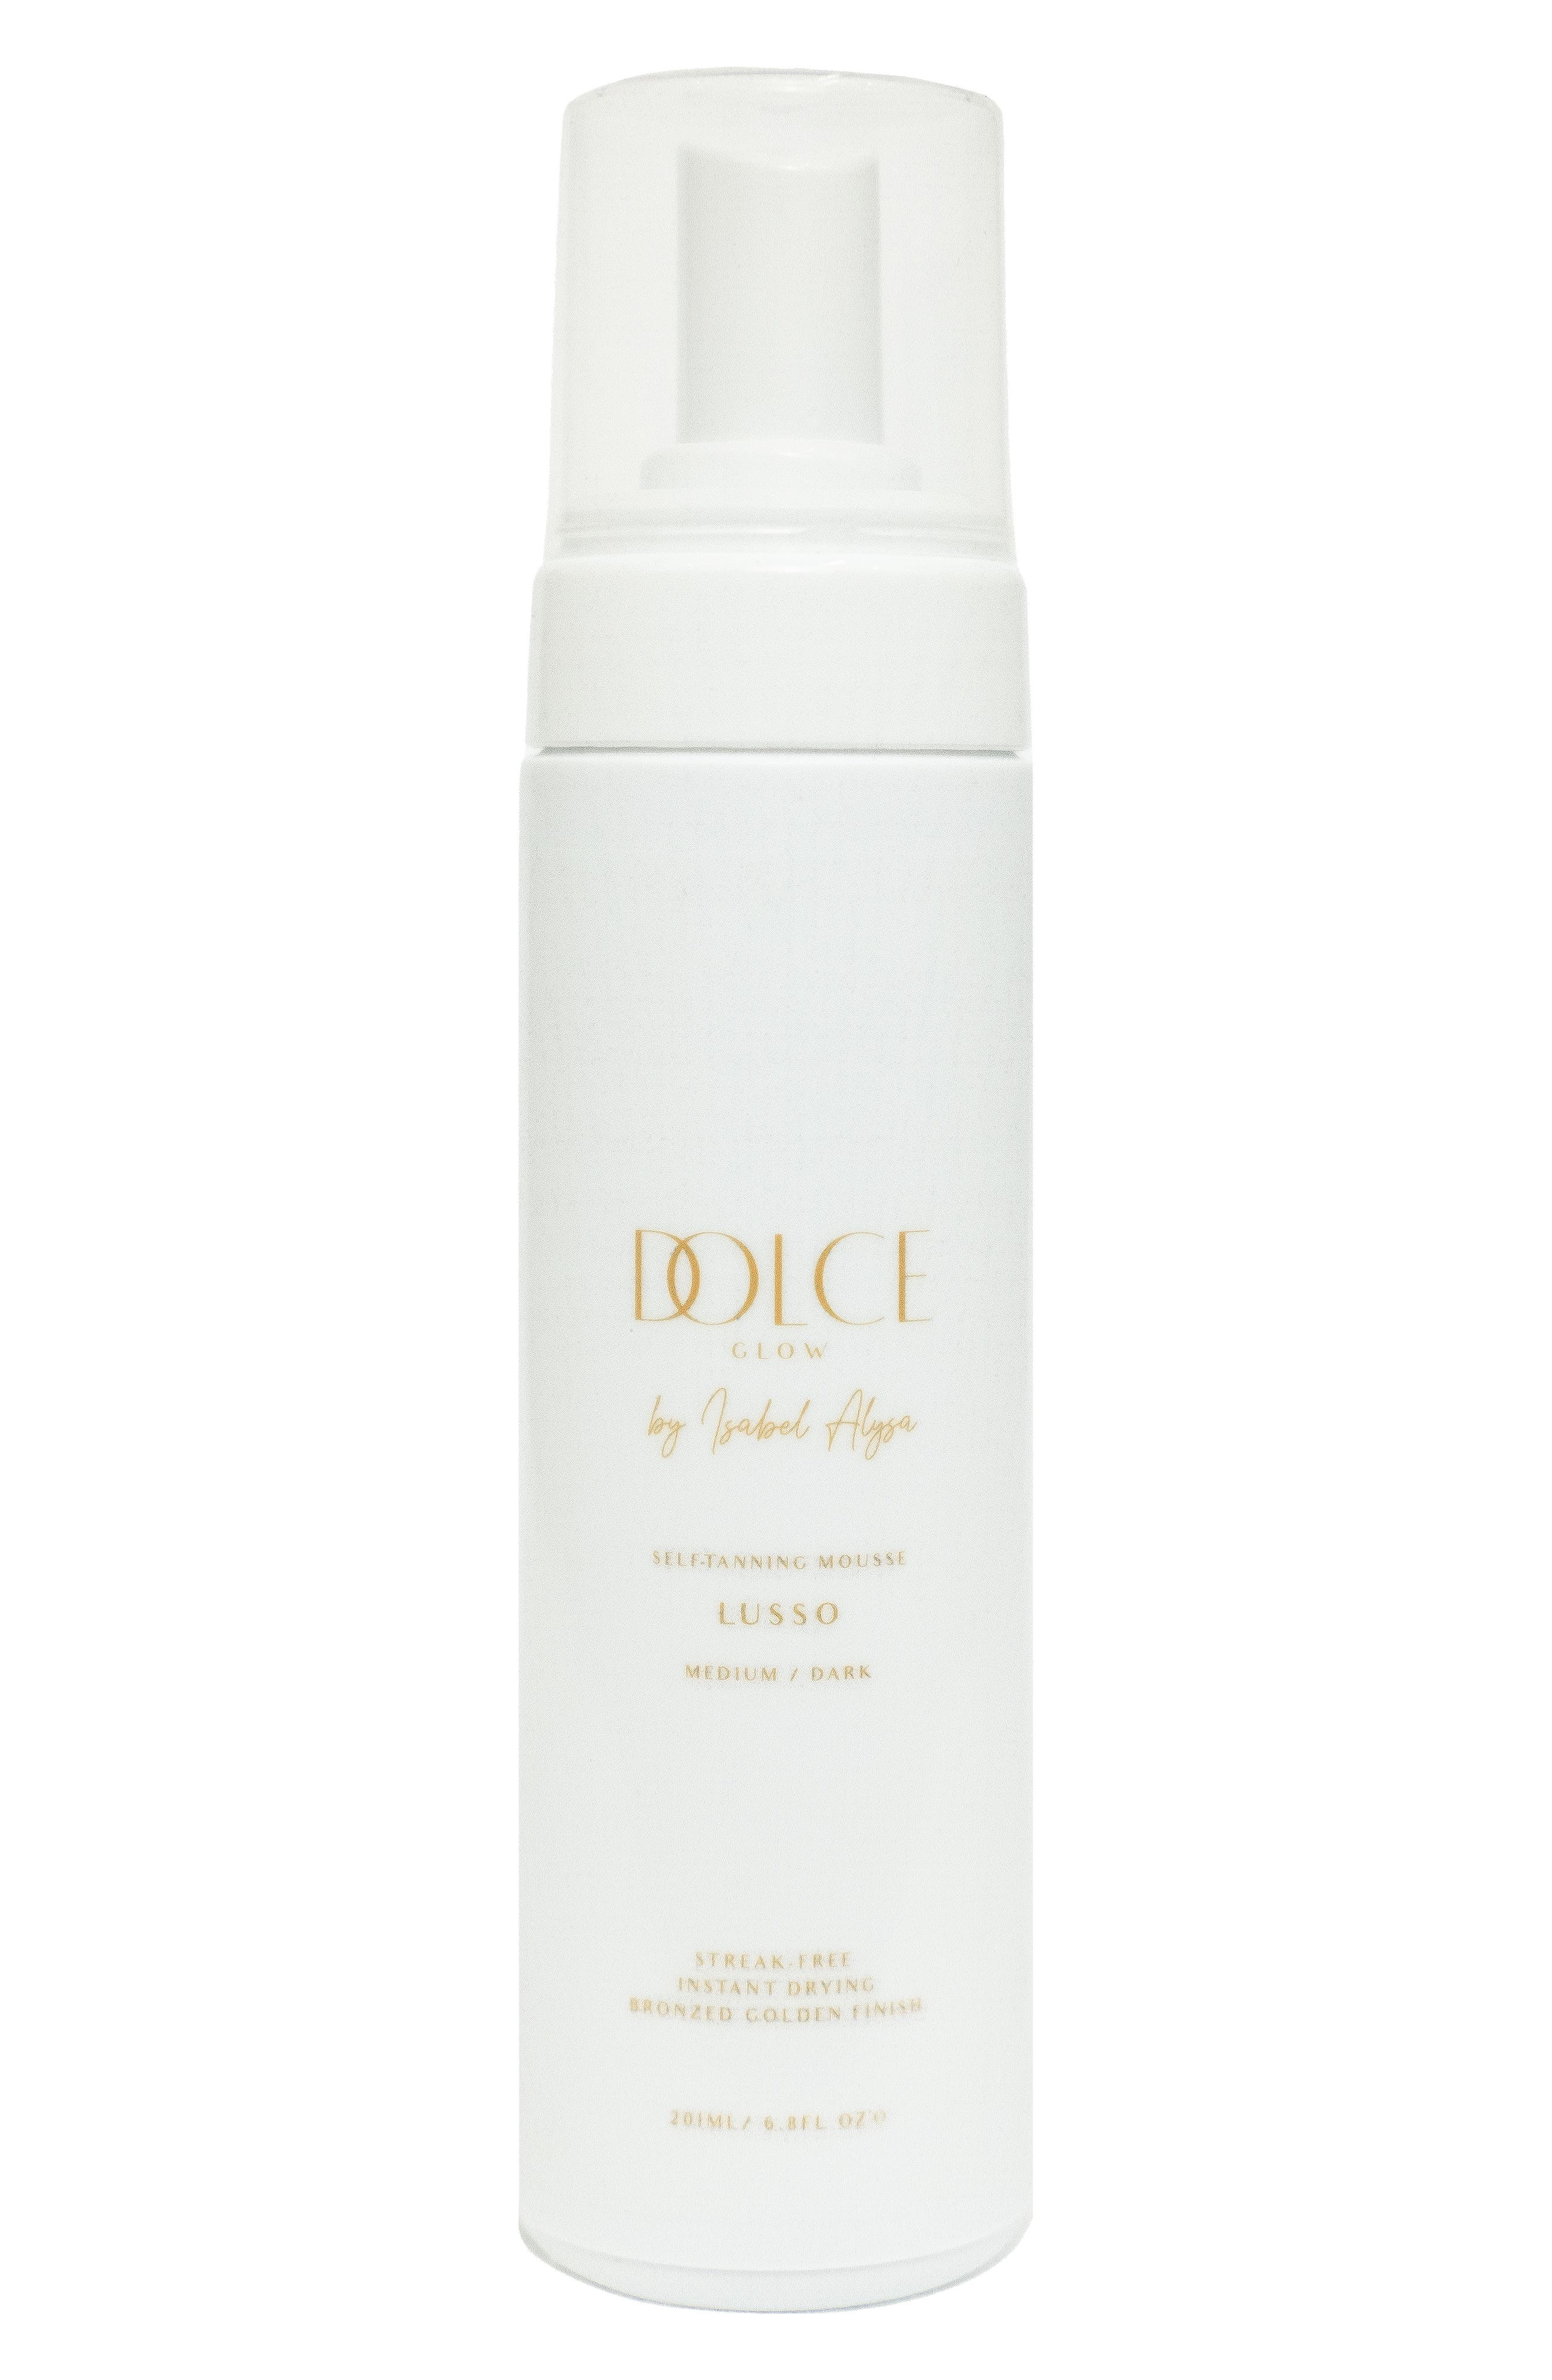 Dolce Glow by Isabel Alysa Lusso Self-Tanning Mousse in None at Nordstrom